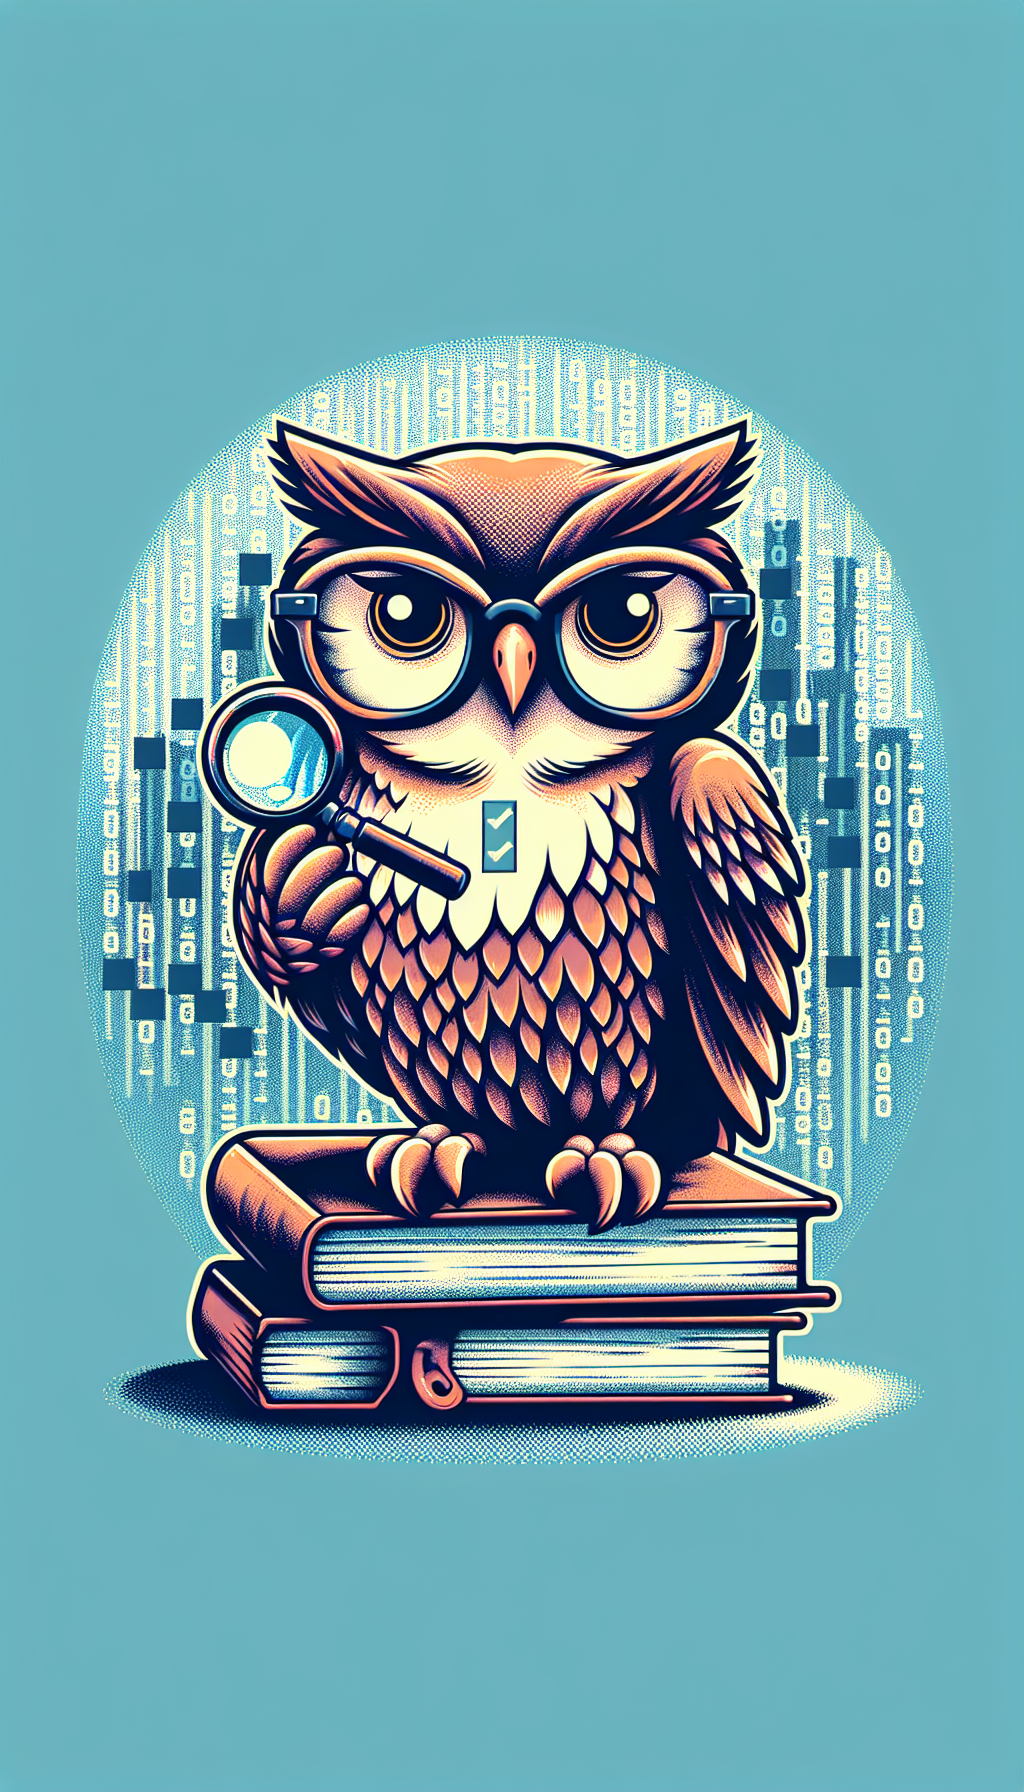 An illustration of a bespectacled owl, perched atop a pile of antique books, holding a magnifying glass in one talon and a checklist in the other. The owl exudes wisdom and attention to detail, symbolizing the self-appraisal process. Behind it, a silhouette of bookshelves fades into a backdrop of whimsical, digital binary code, representing a blend of traditional and modern appraisal techniques.